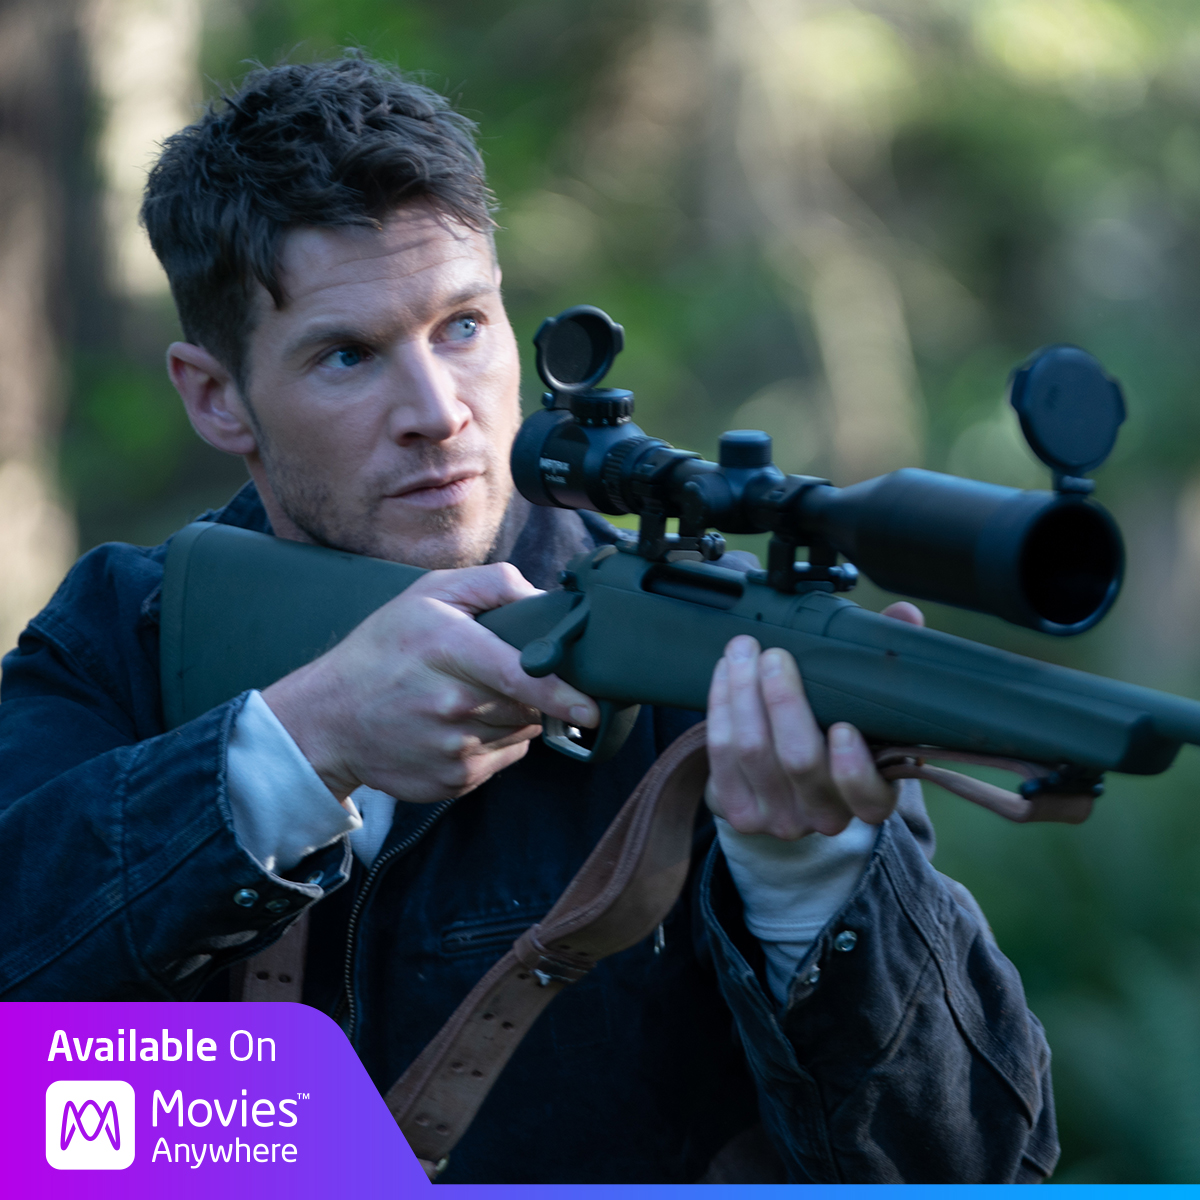 Check out #SniperAssassinsEnd and the entire #SniperFilms collection on Digital on @Movies_Anywhere Today! bit.ly/SniperAE